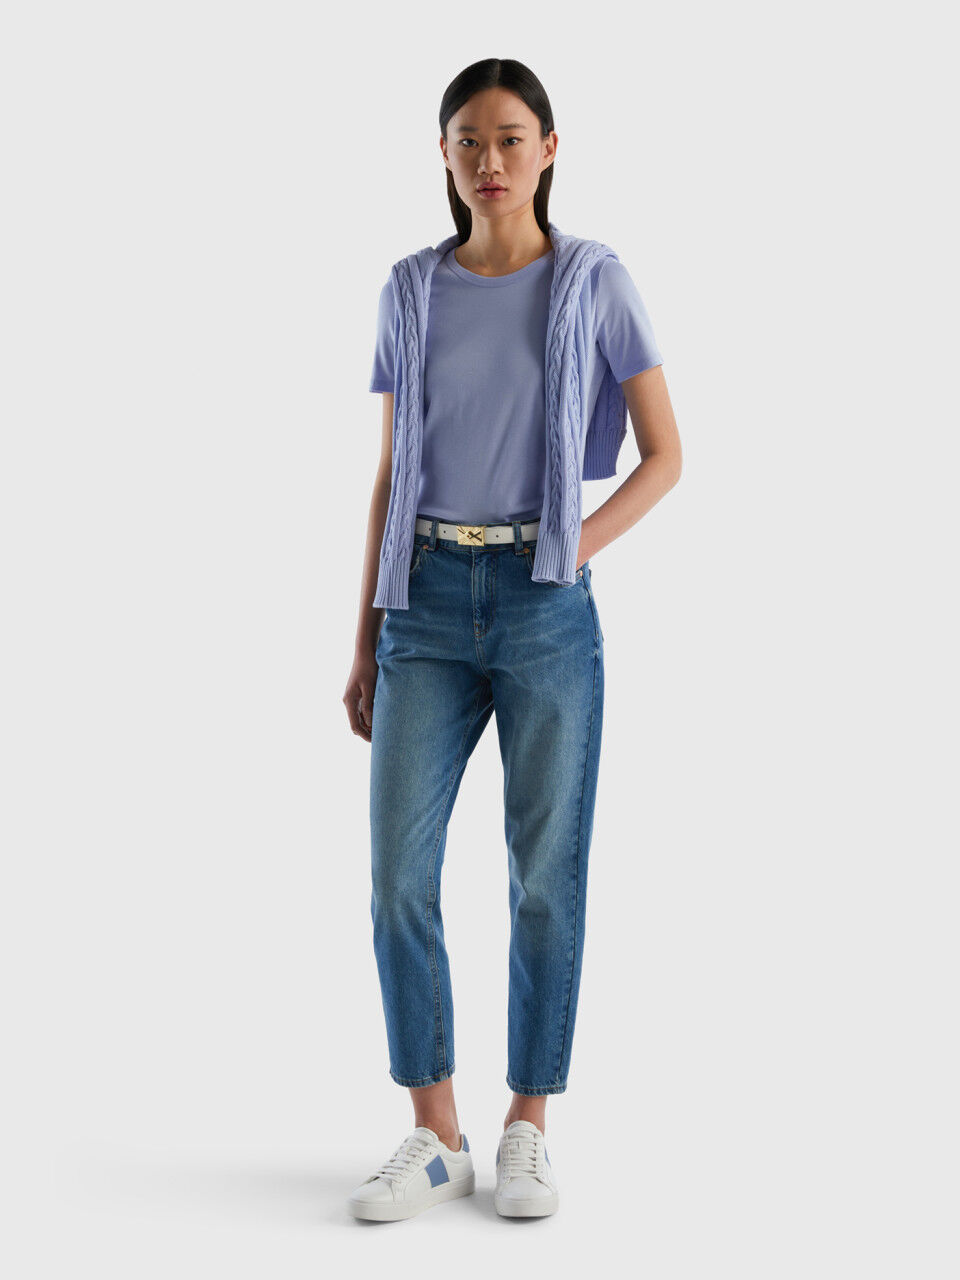 Women's High-Waisted Jeans New Collection 2023 | Benetton